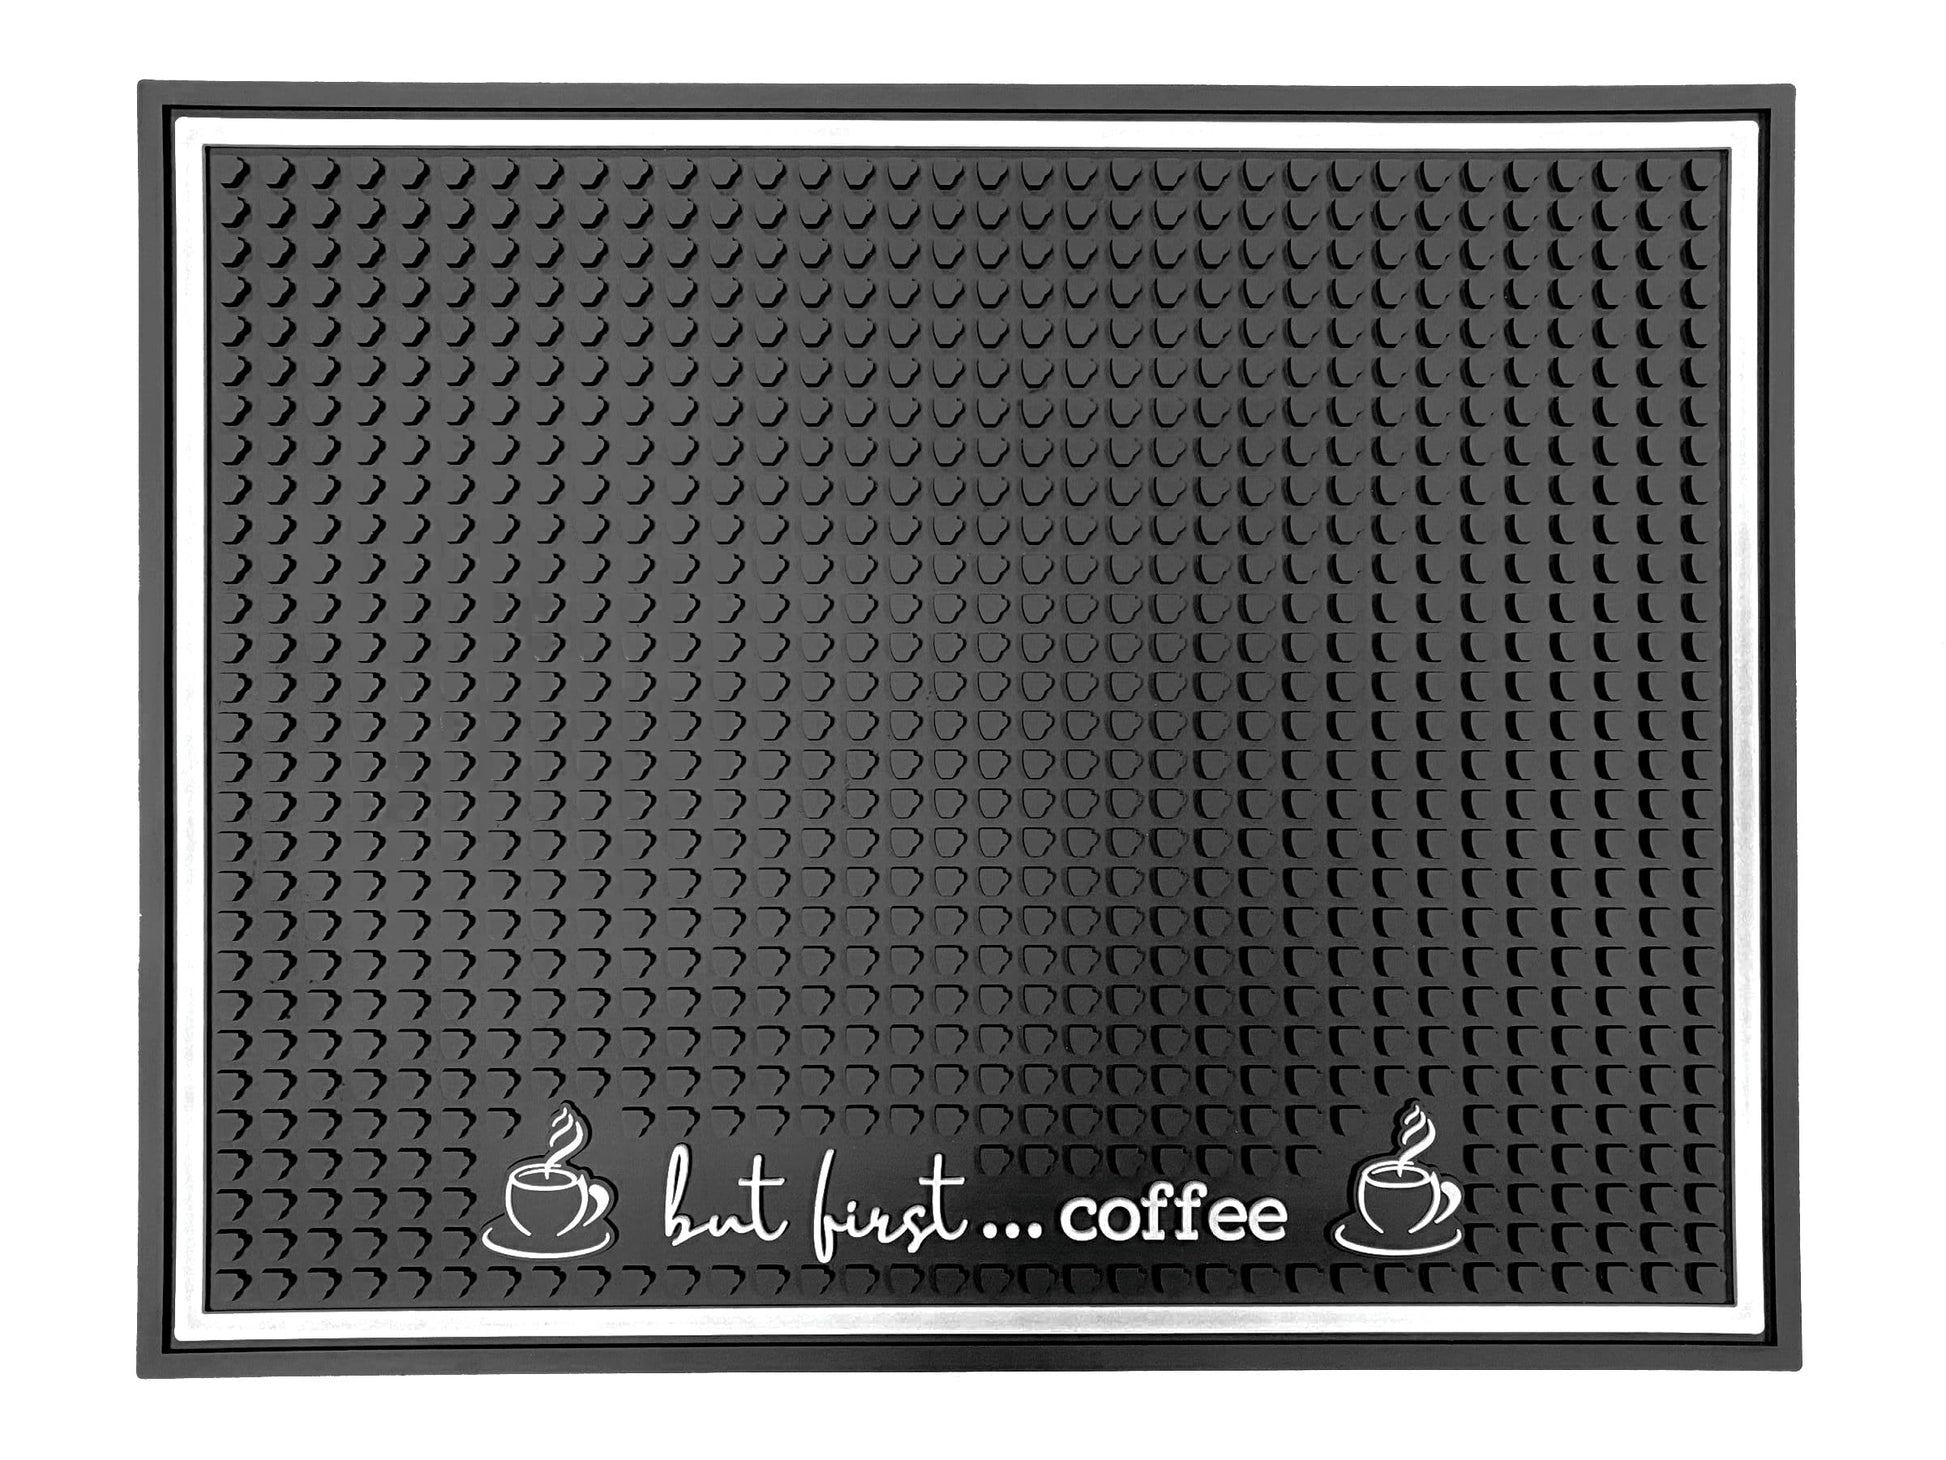 Coffee Station Accessory Rubber Spill Mat But First Coffee Black